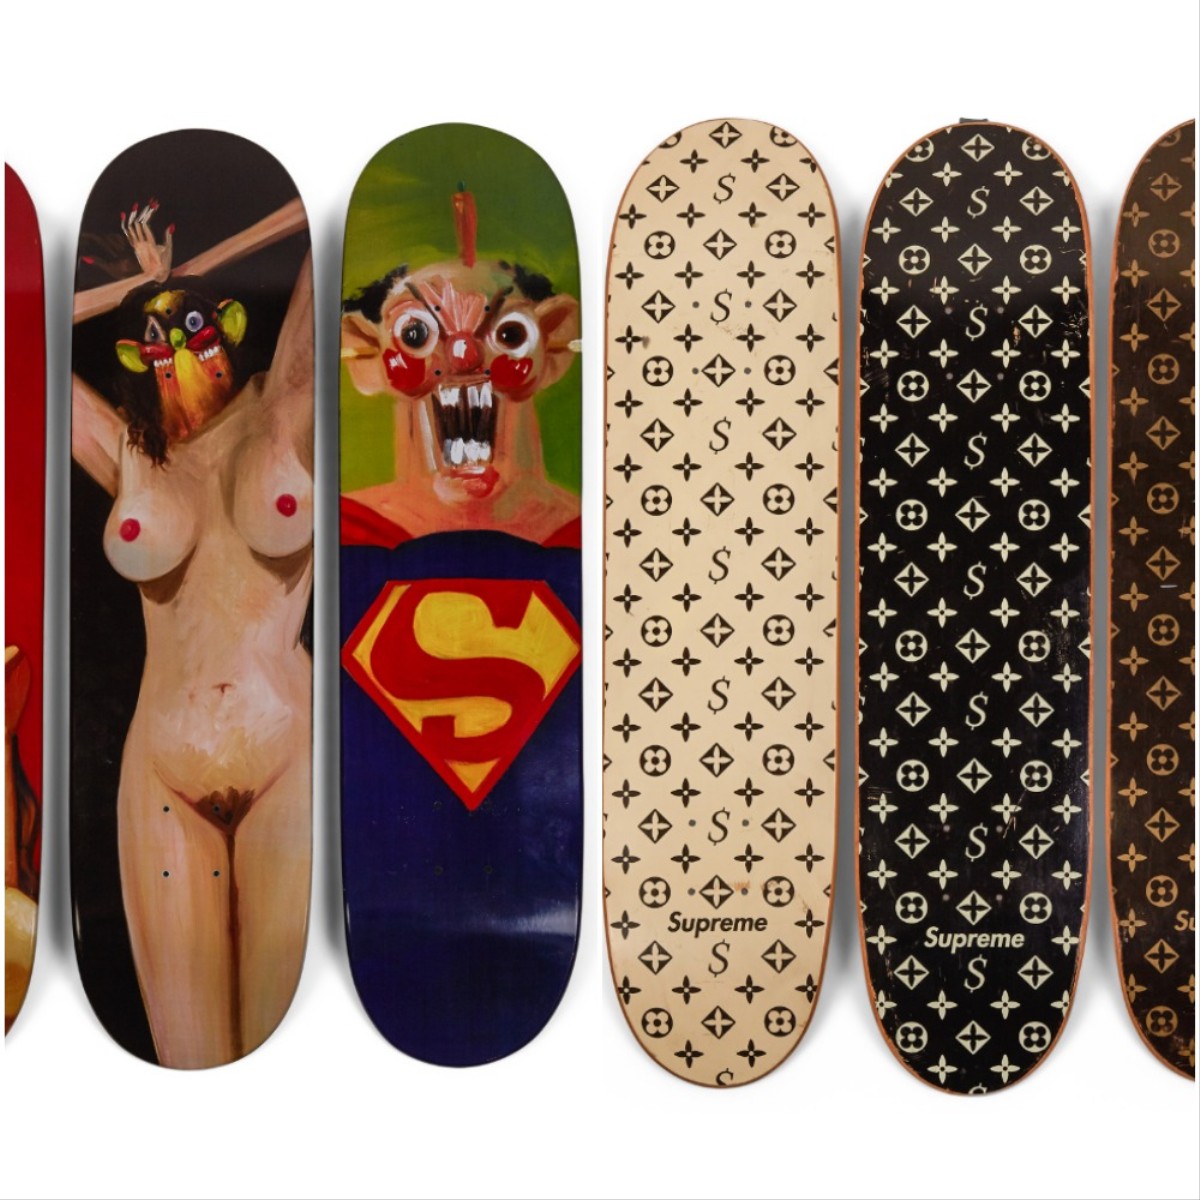 Sotheby's Will Sell a Complete Set of All the Skateboard Decks Supreme Has  Ever Produced for Up to $1.2 Million